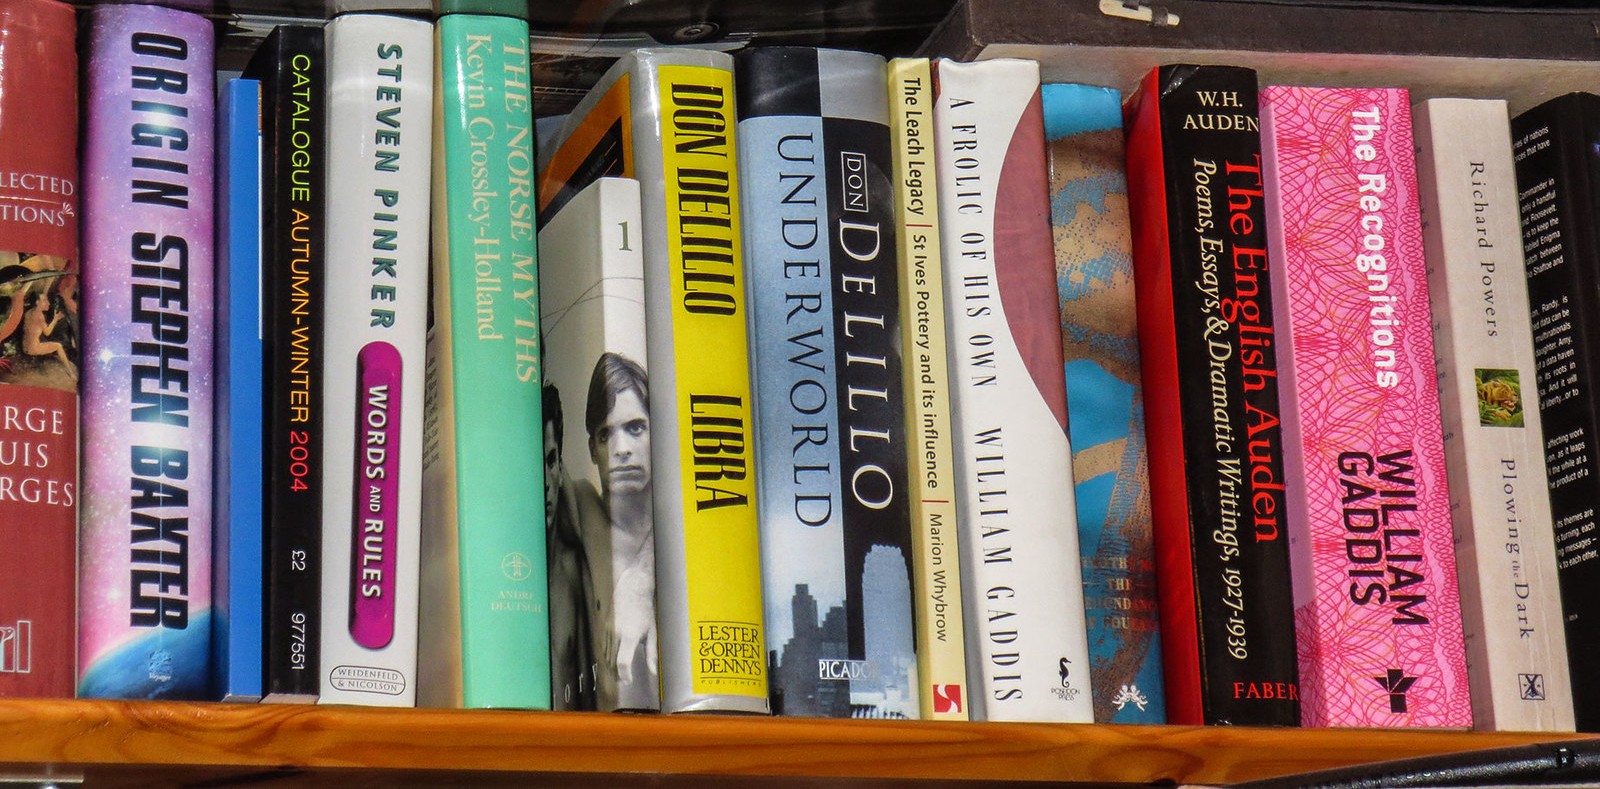 Books by Don Delillo and others